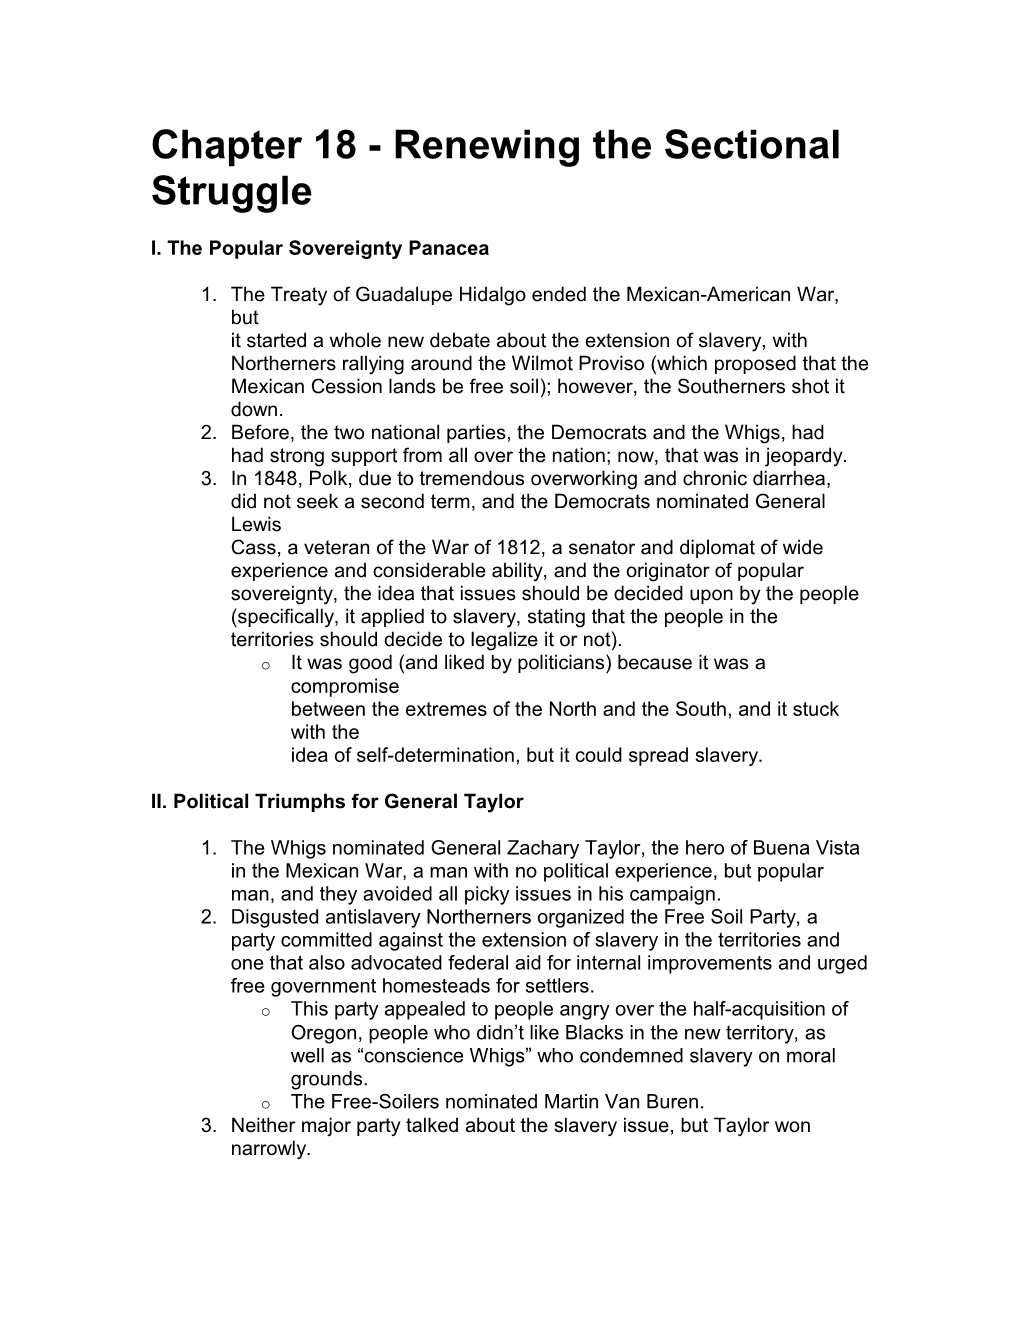 Chapter 18 - Renewing the Sectional Struggle